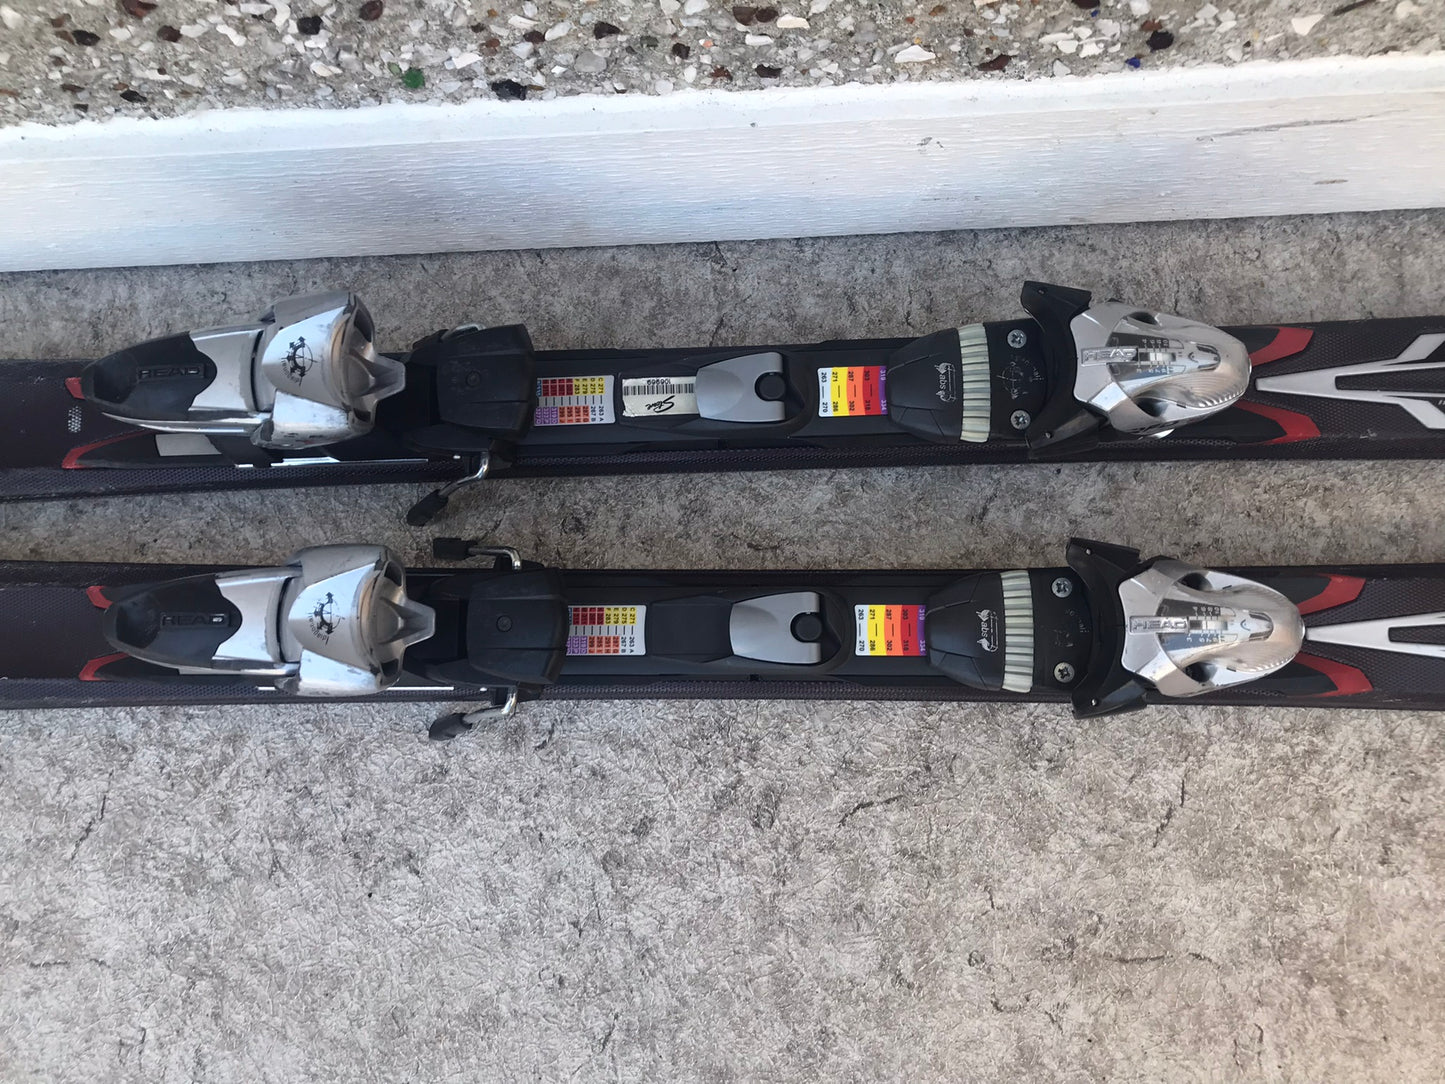 Ski 163 Head Liquid Metal Parabolic Black Plum With Bindings That fit Up To Size 13